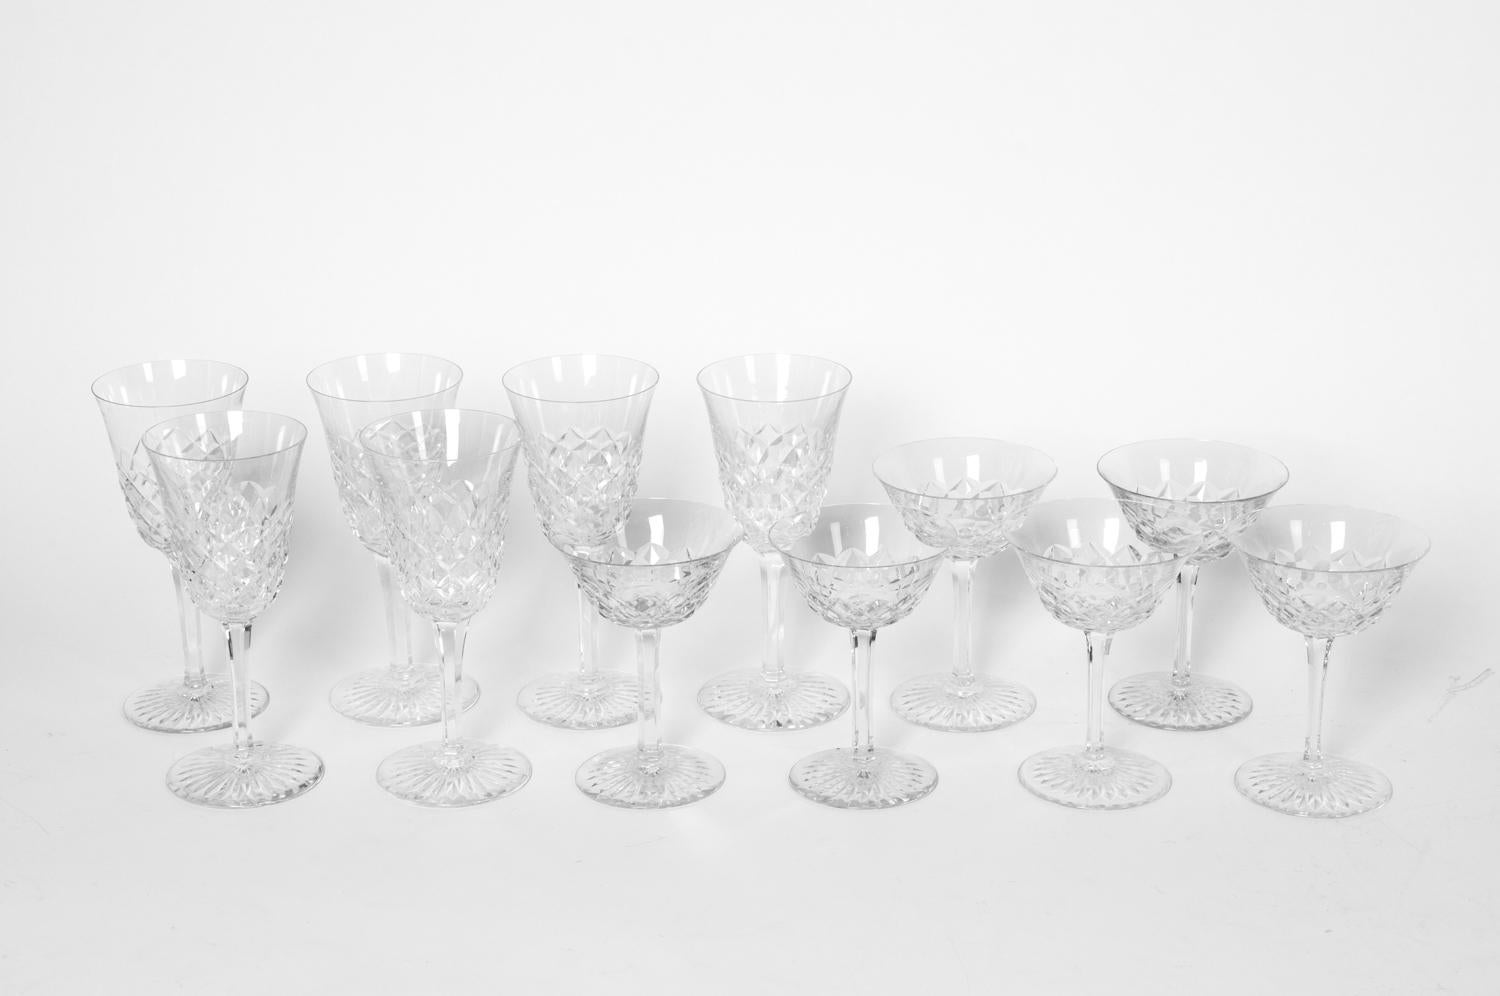 Vintage Baccarat crystal three sizes glassware set of 18 pieces. Each glass is in excellent condition, maker's mark undersigned. Each wine glass measure 8 inches x 3.4 inches. Each Champagne coupe measure: 5.5 inches x 4 inches. Each after dinner